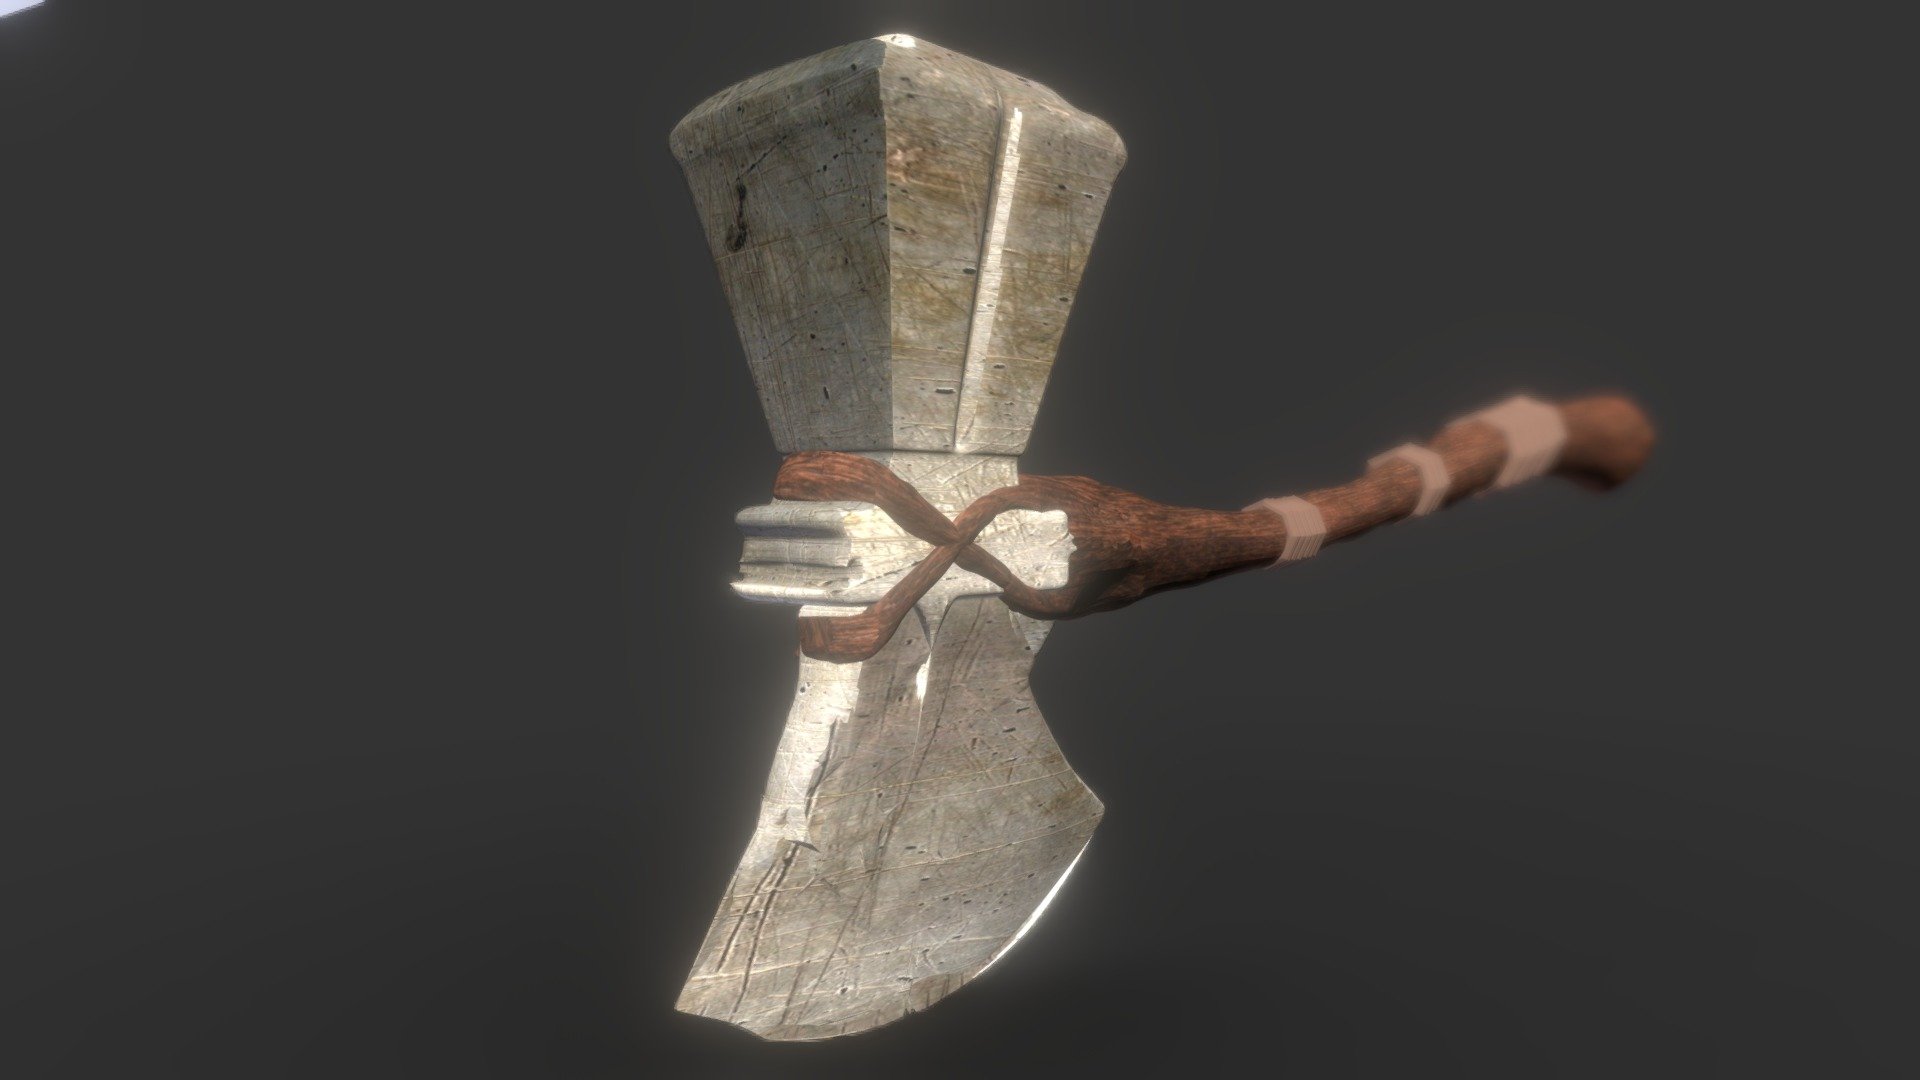 Thor's StormBreaker from Marvel Avengers - Infinity War. If you liked please subsrcibe and like the model 3d model